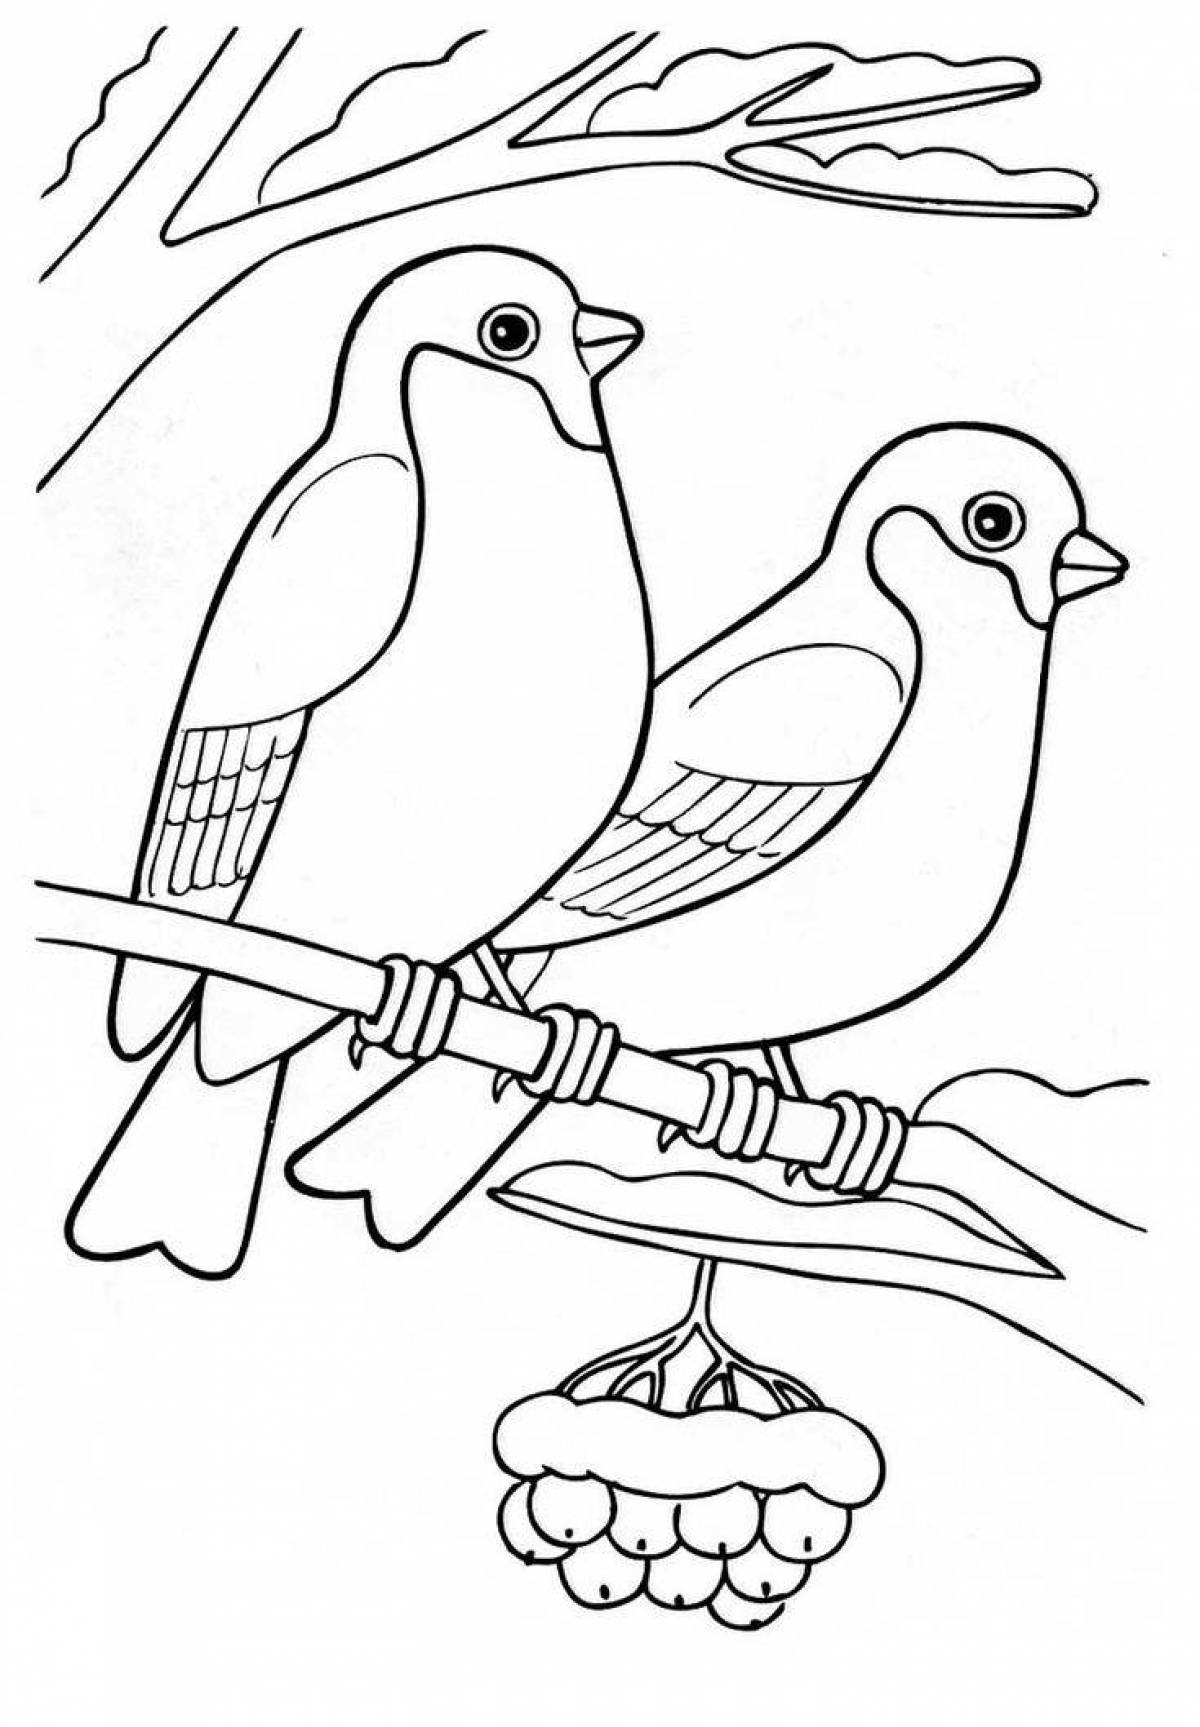 Fabulous wintering birds coloring pages for children 5-6 years old